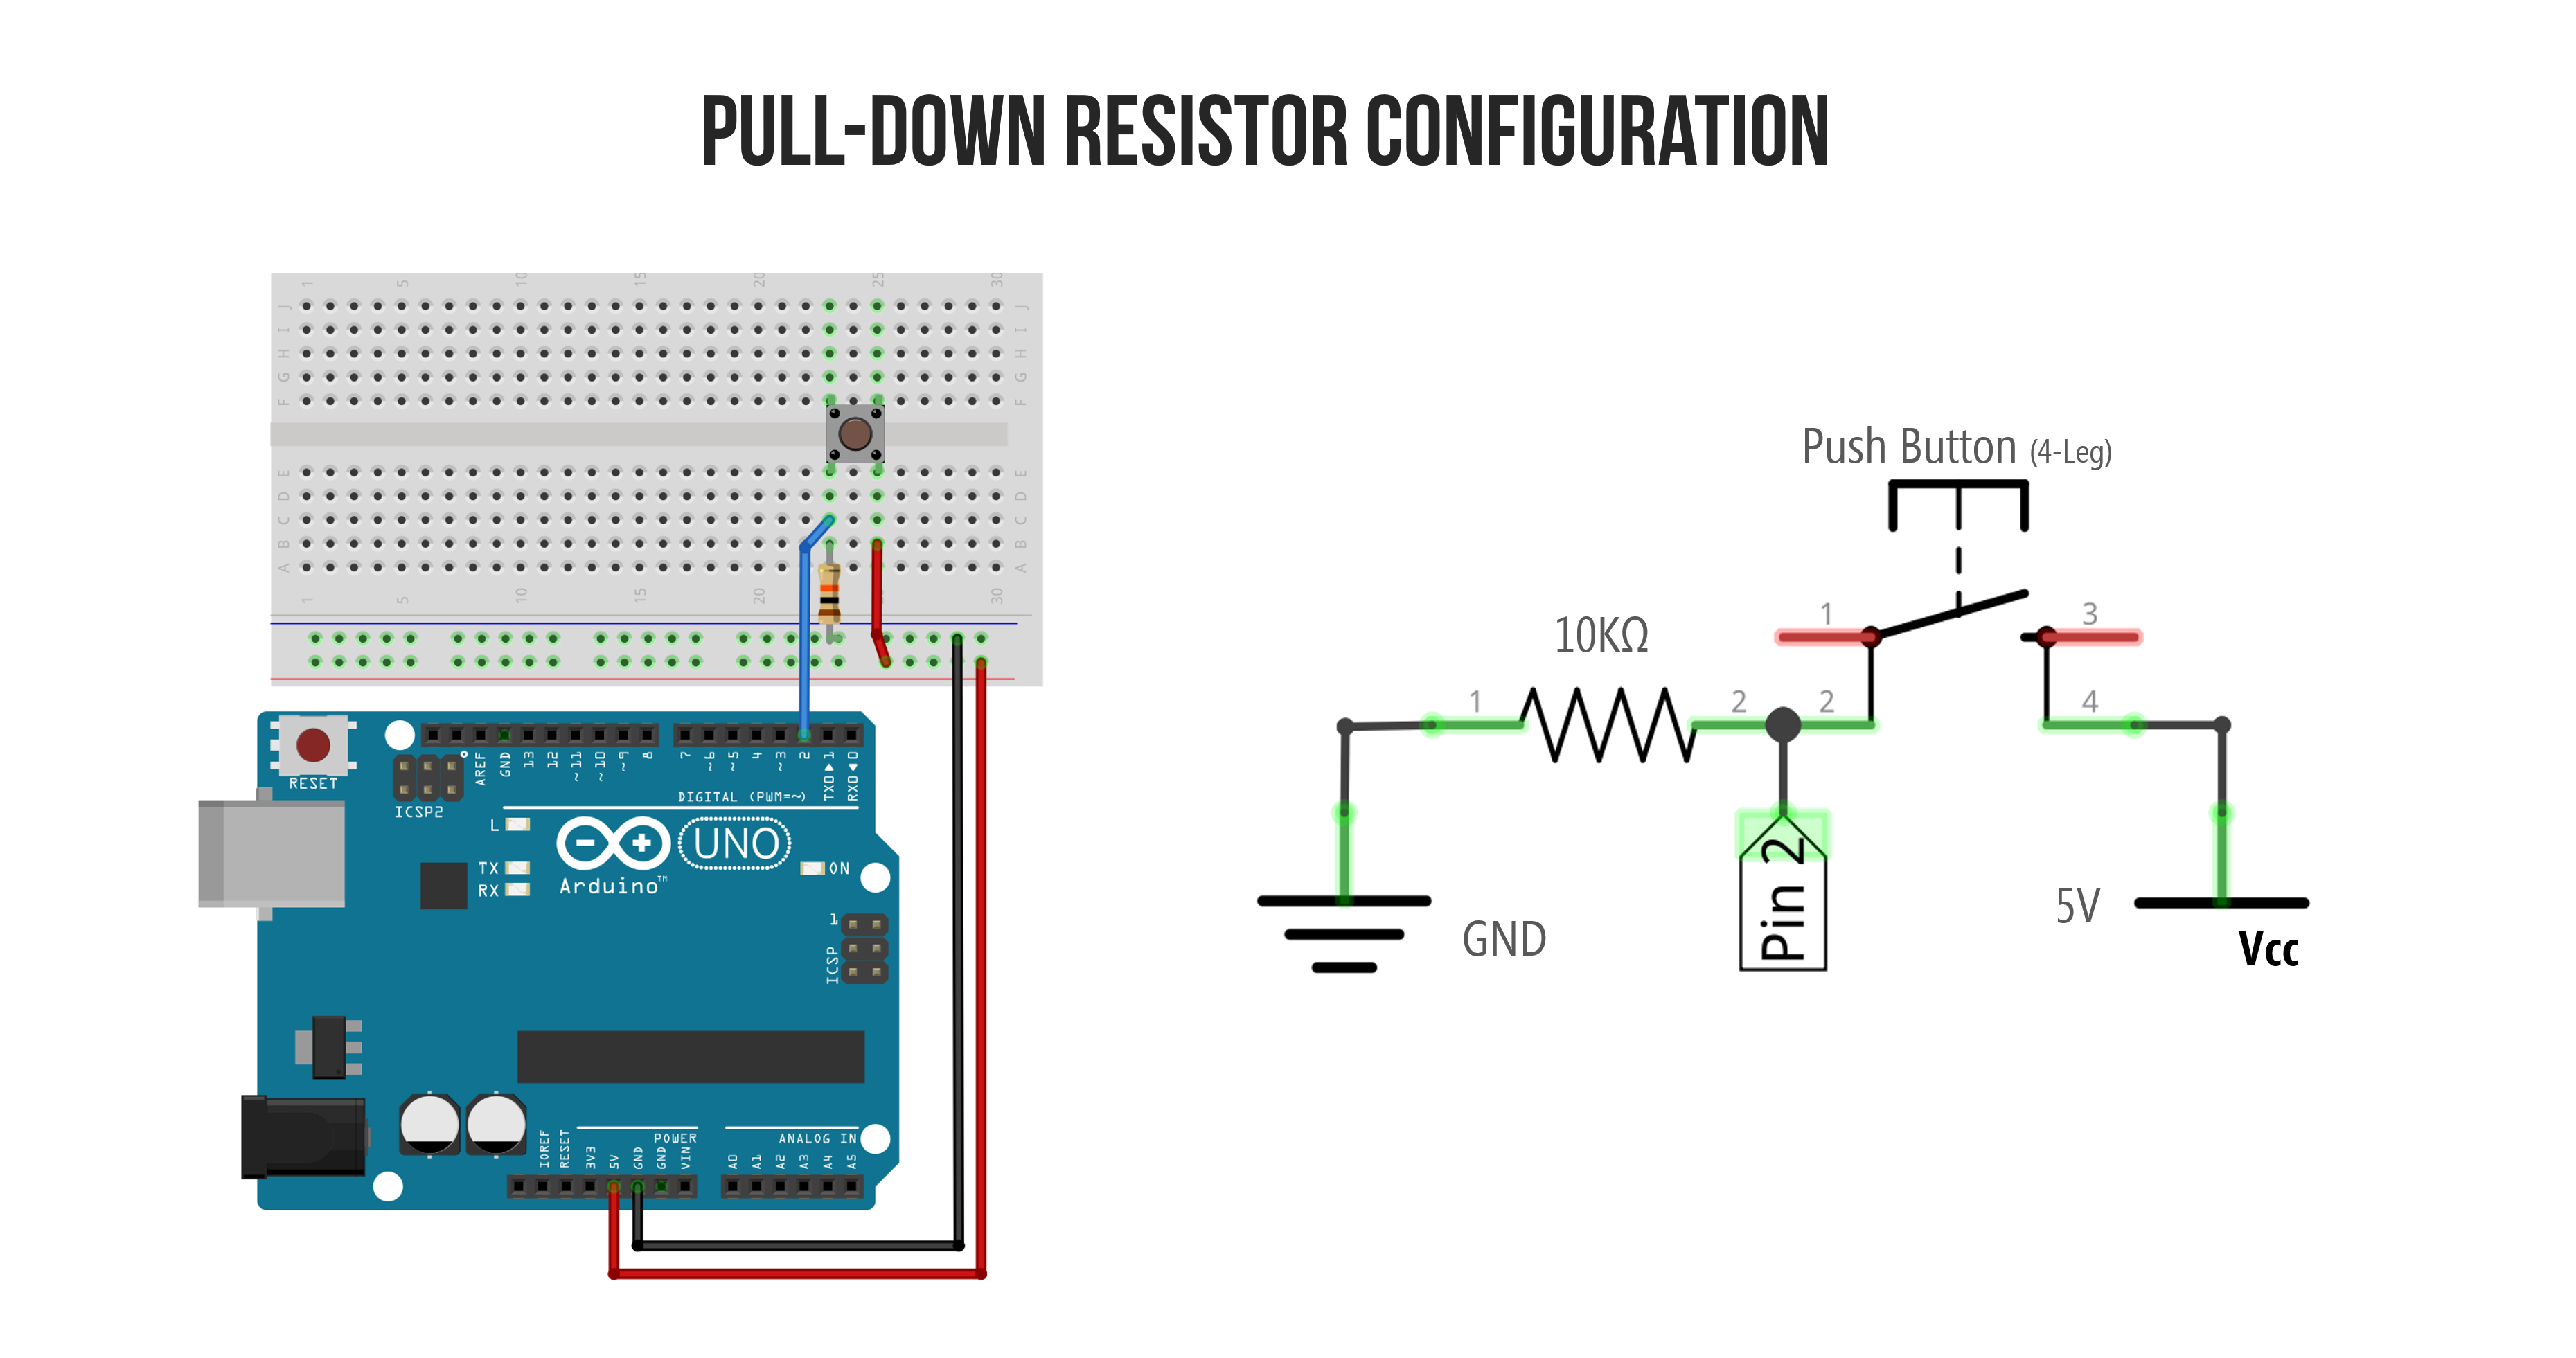 Wiring diagram and schematic for a button with a pull-down resistor wired to digital I/O Pin 2